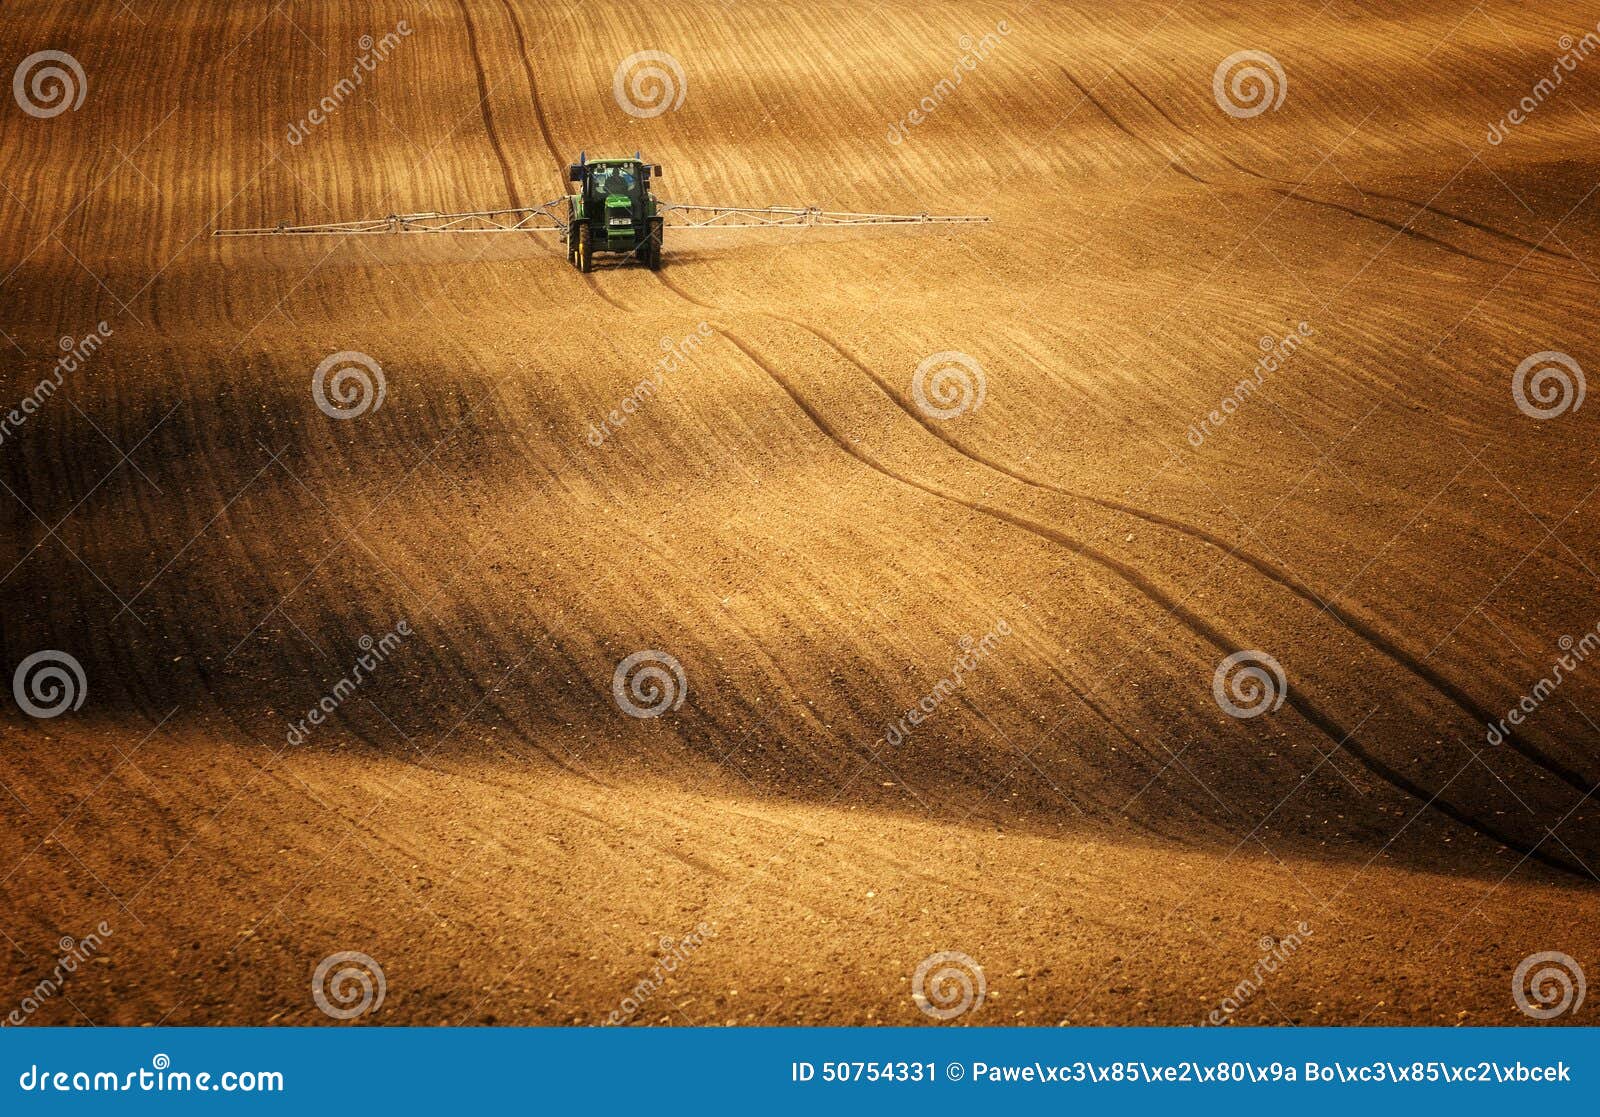 tractor while spraying fields where corn rises